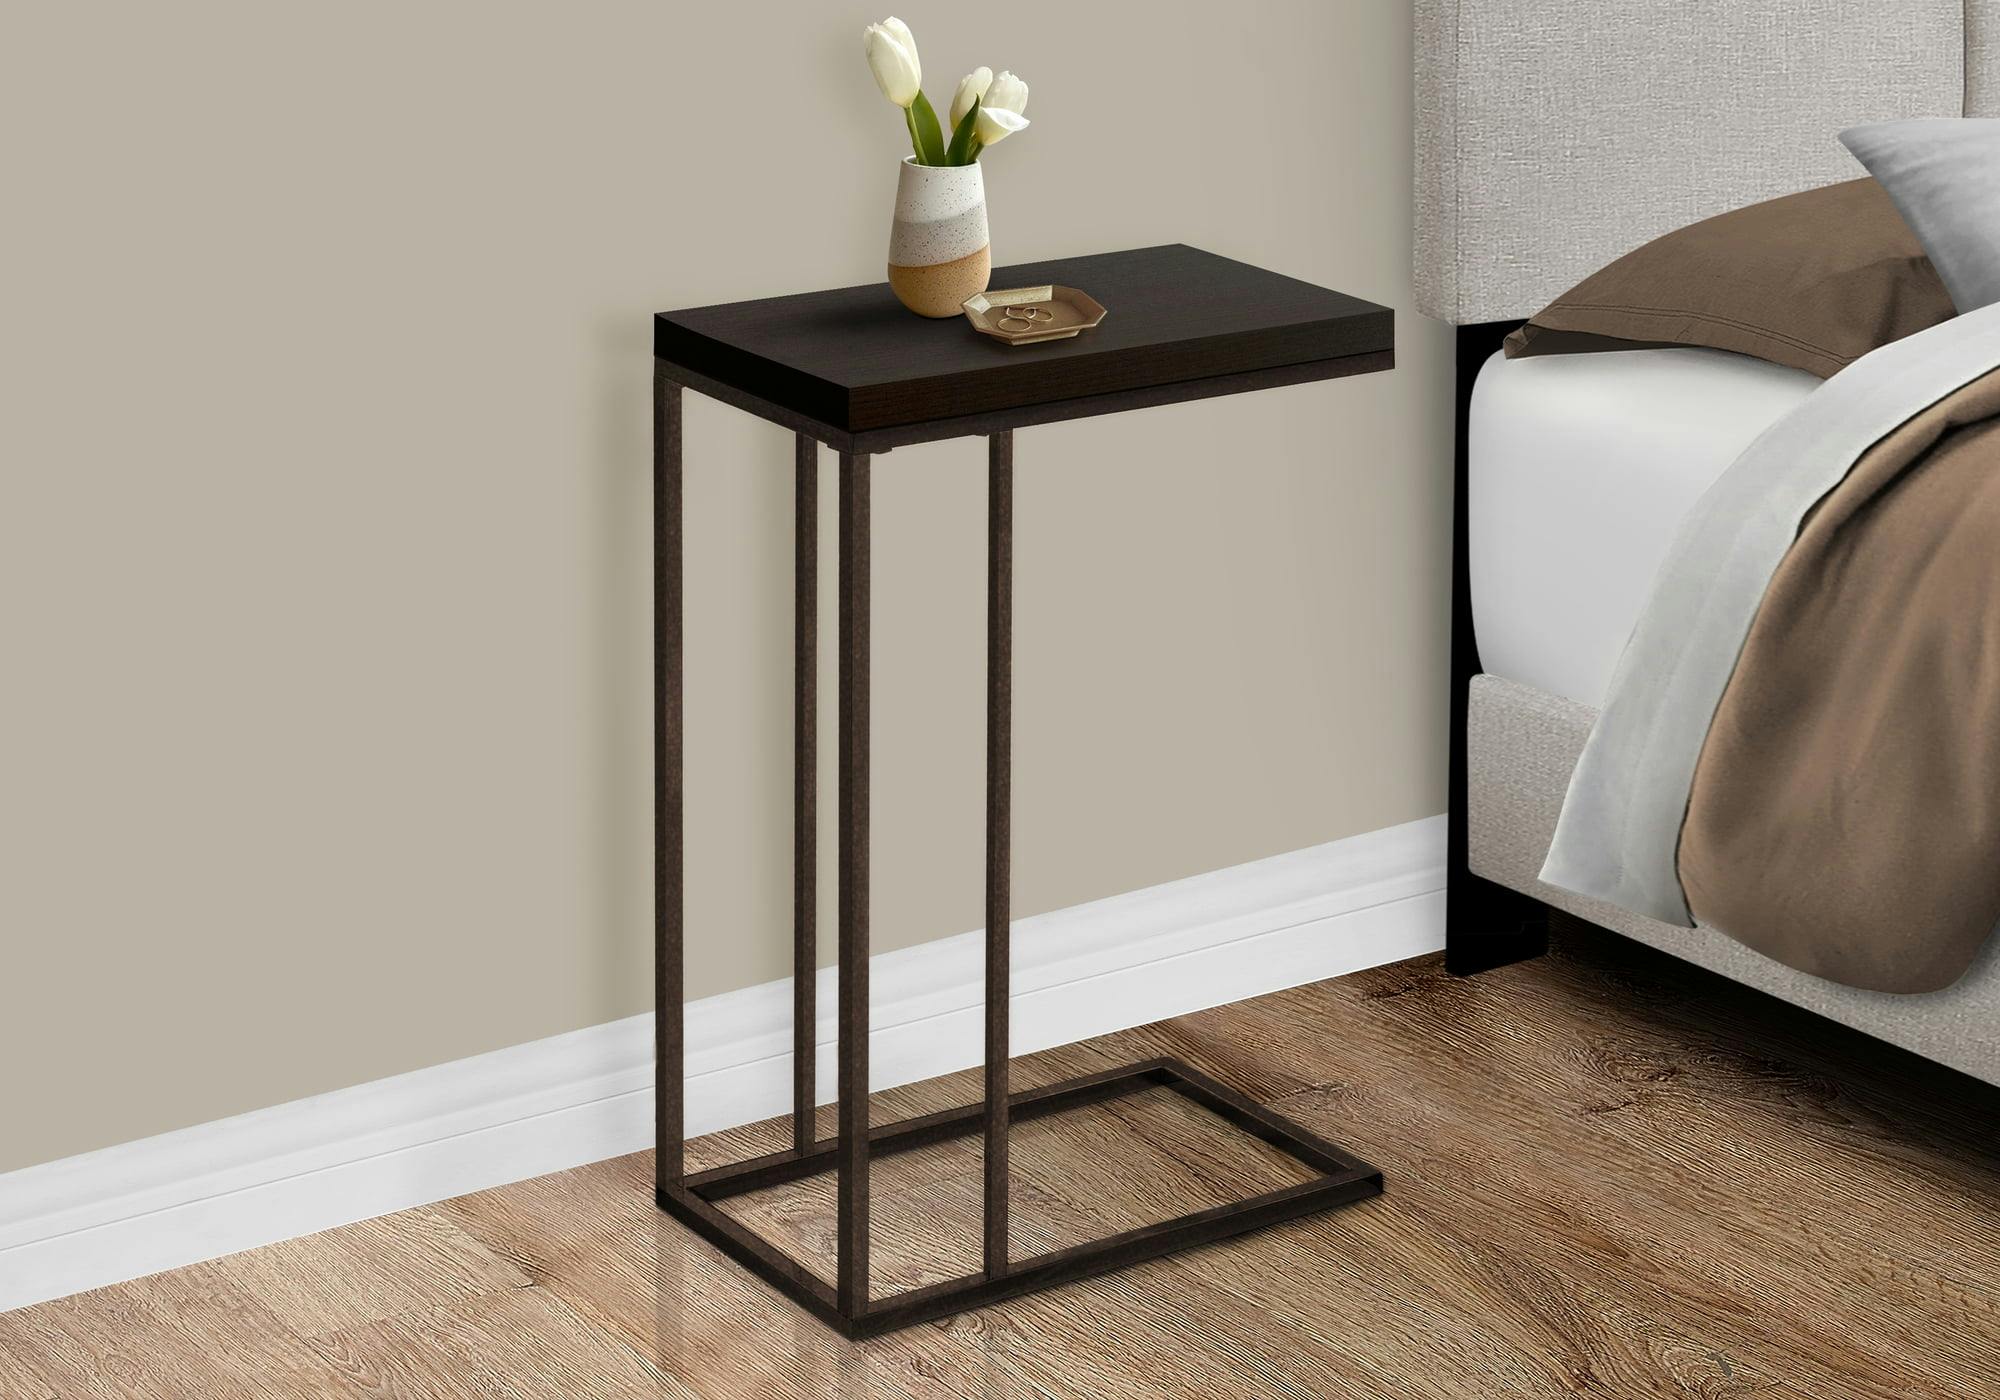 Cappuccino Finish Rectangular Accent Table with Bronze Metal Base